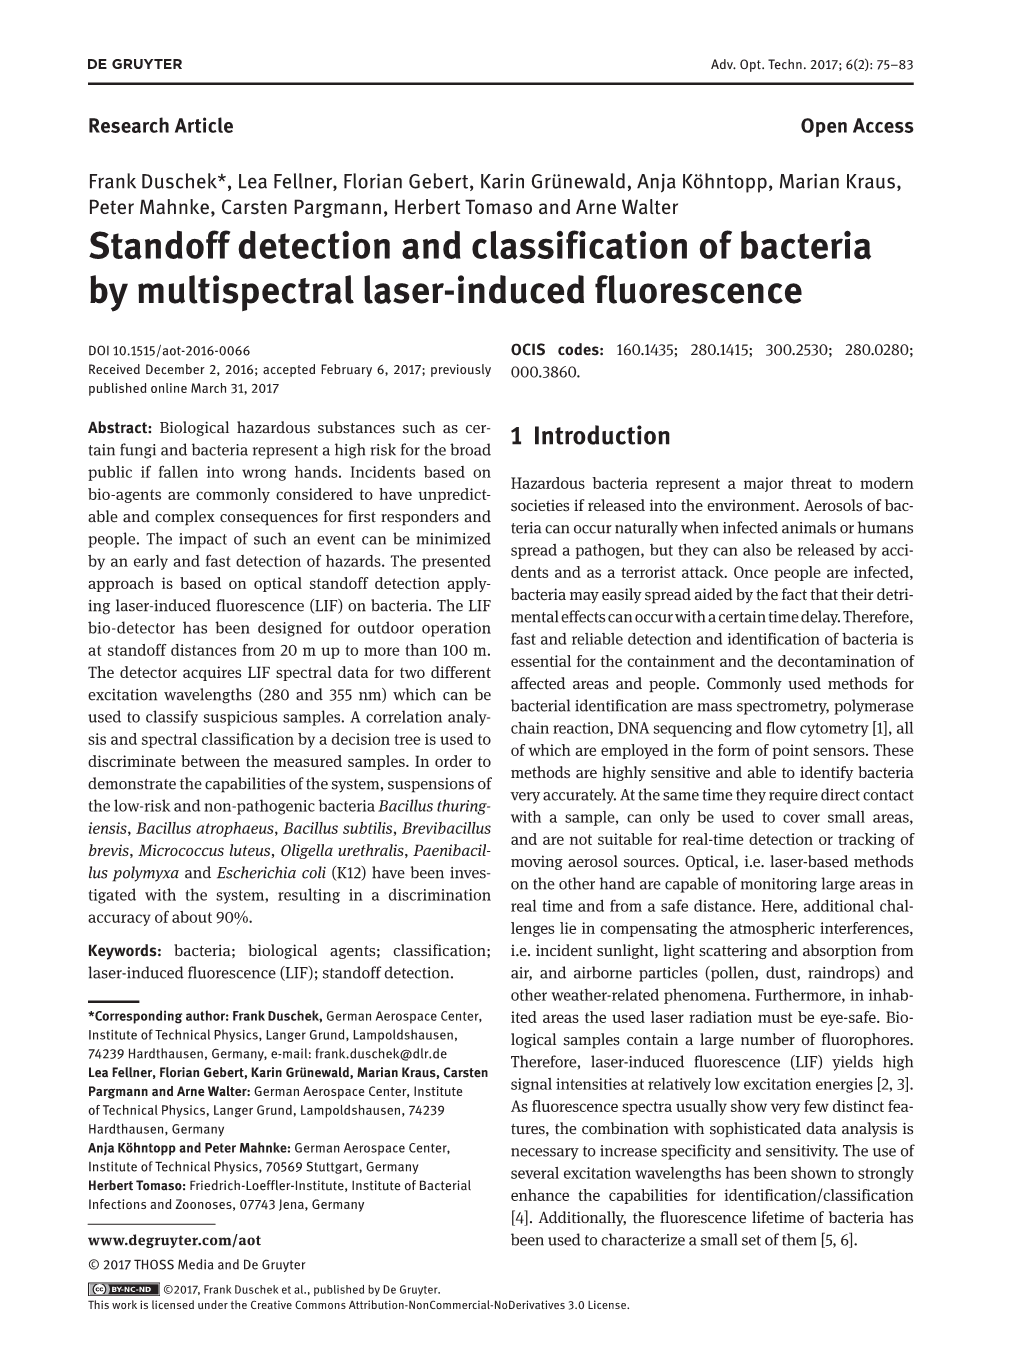 Standoff Detection and Classification of Bacteria by Multispectral Laser-Induced Fluorescence